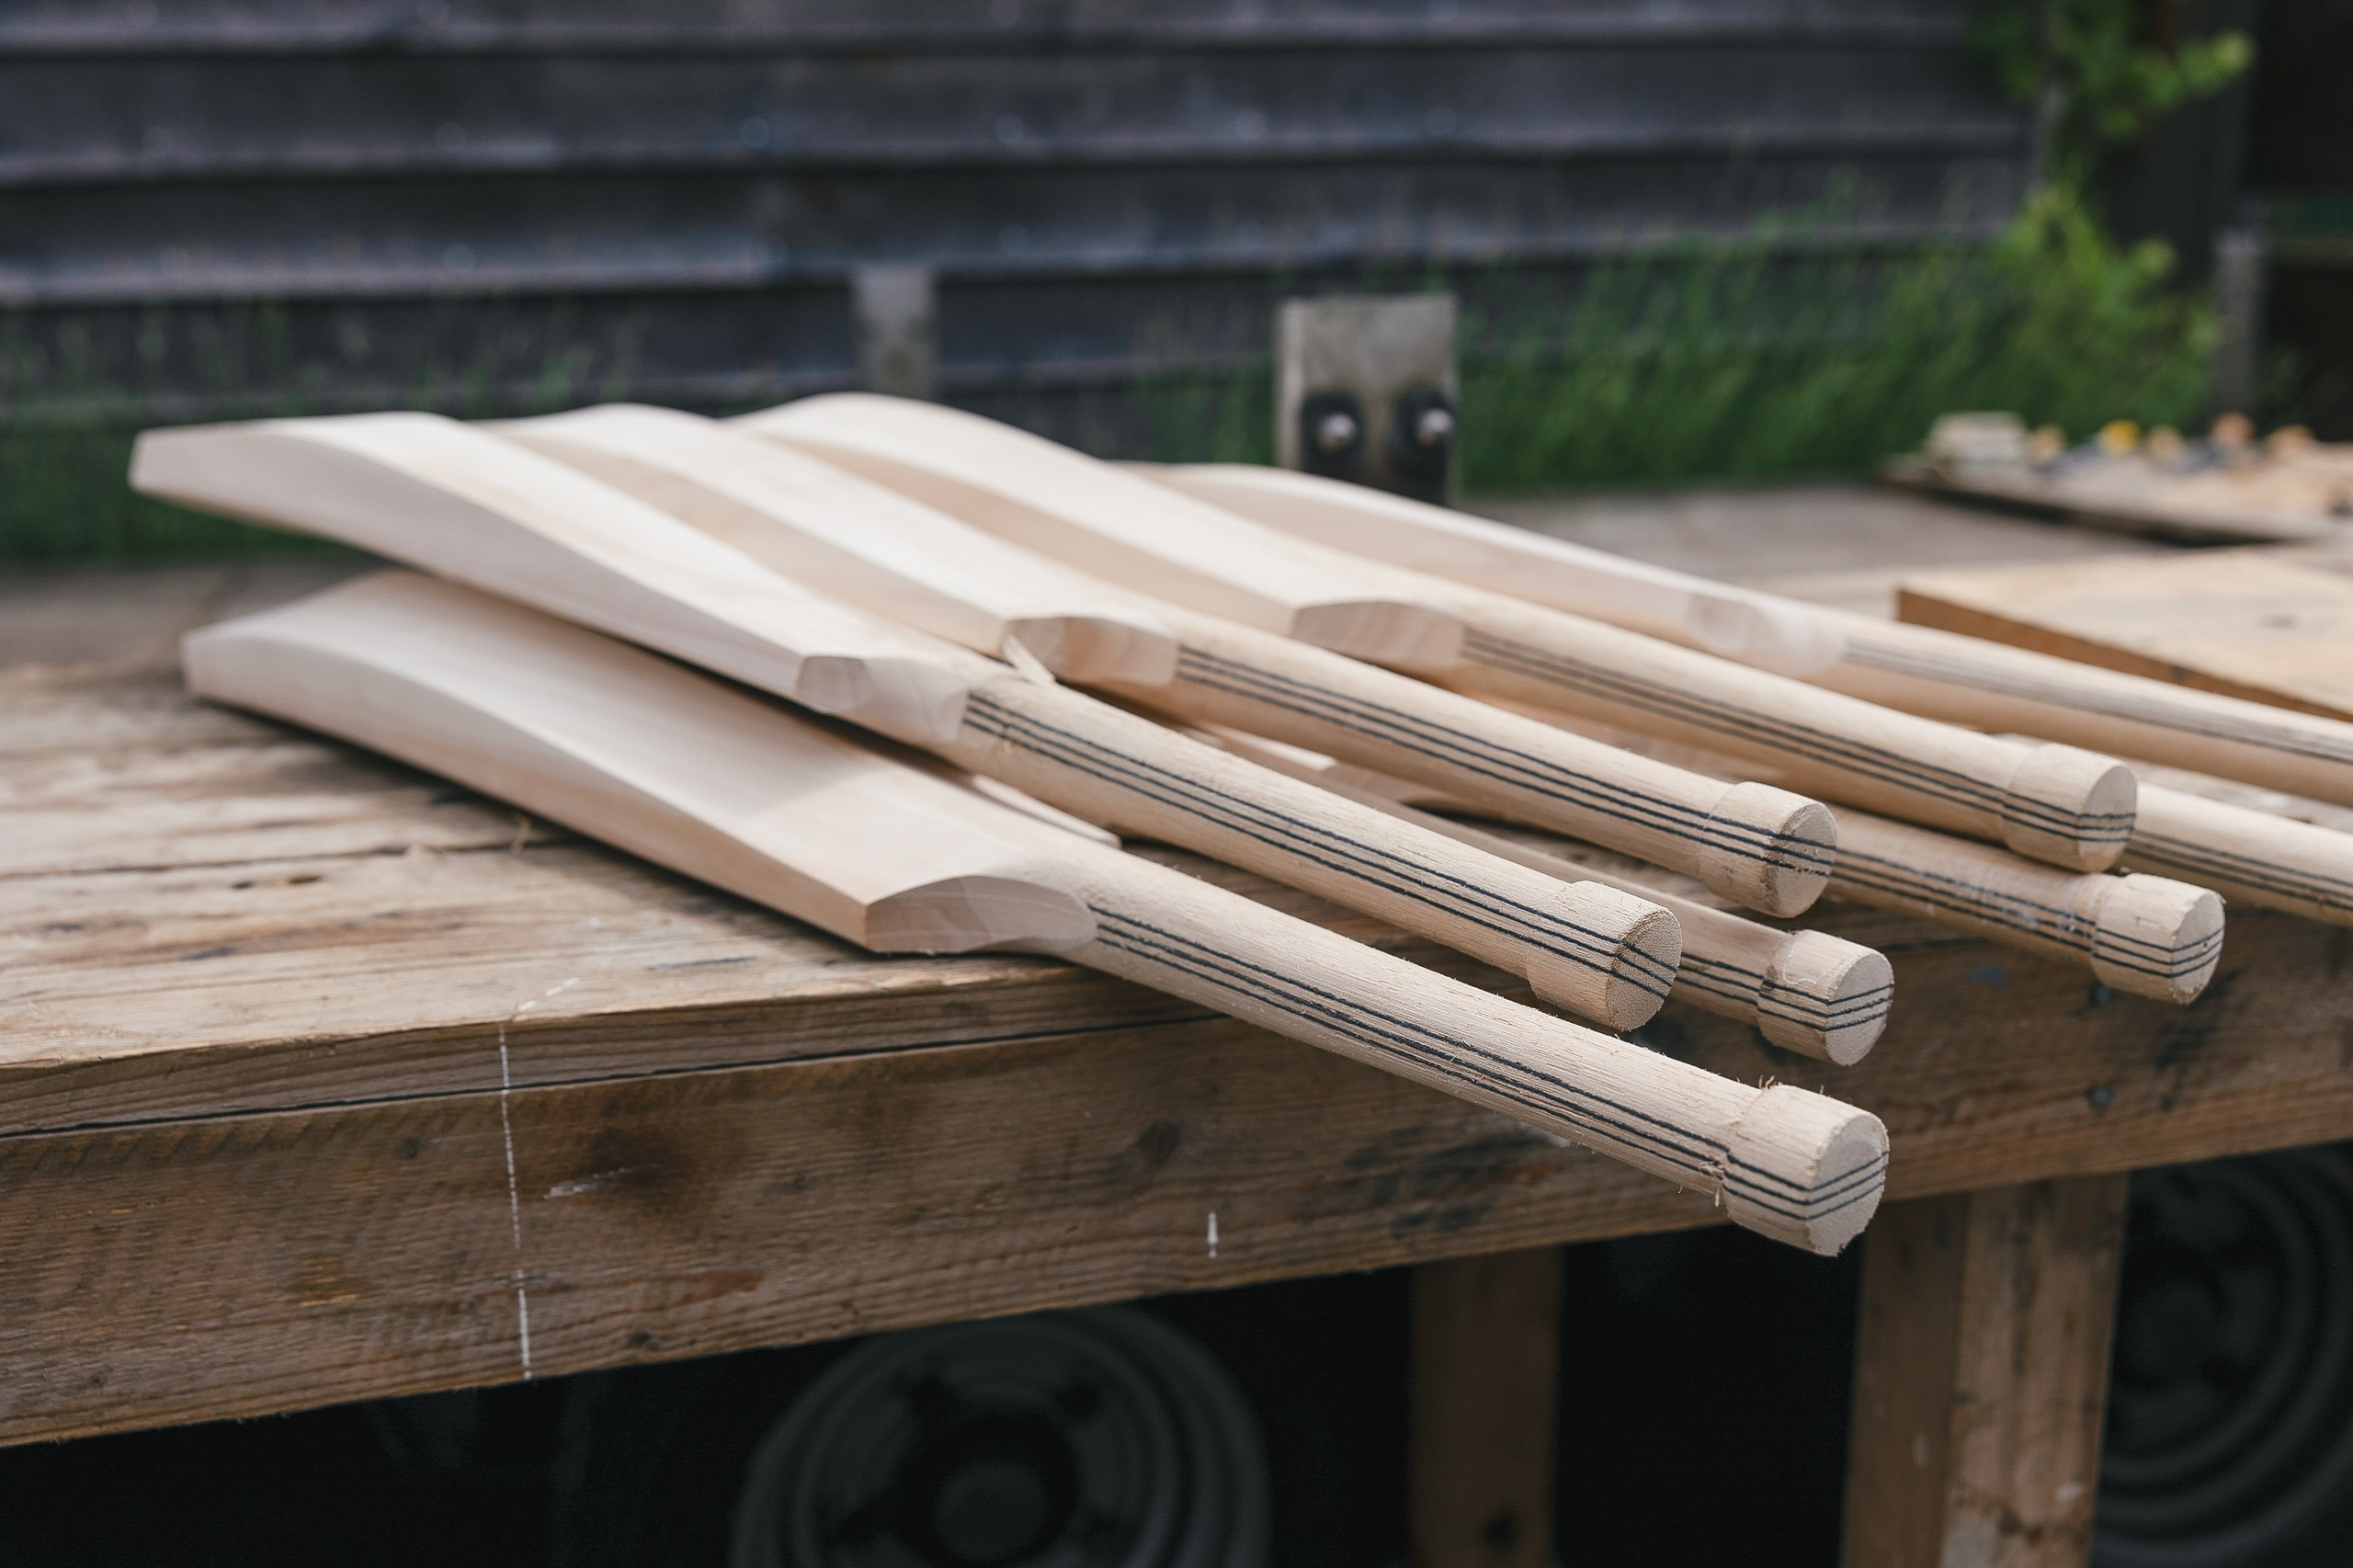 Handcrafted Bespoke English Willow Cricket Bats